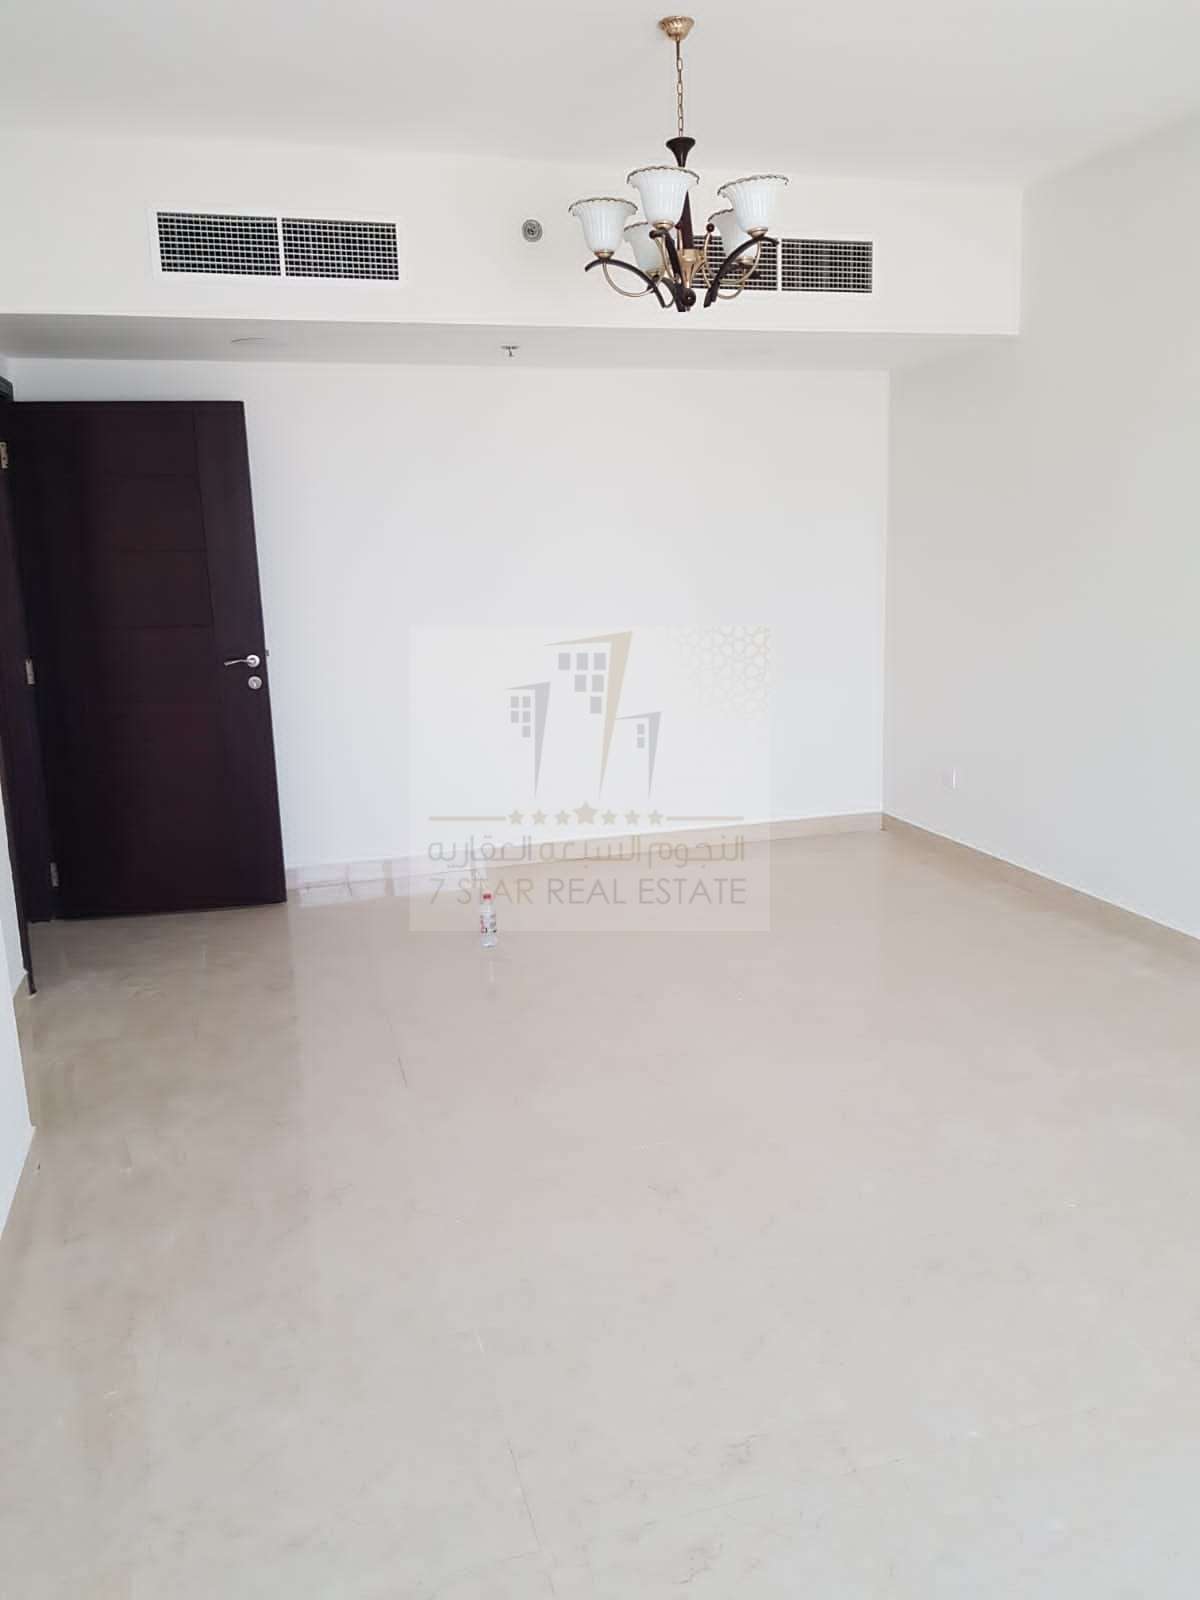 2 BR  Apartment For Rent in Al Khan